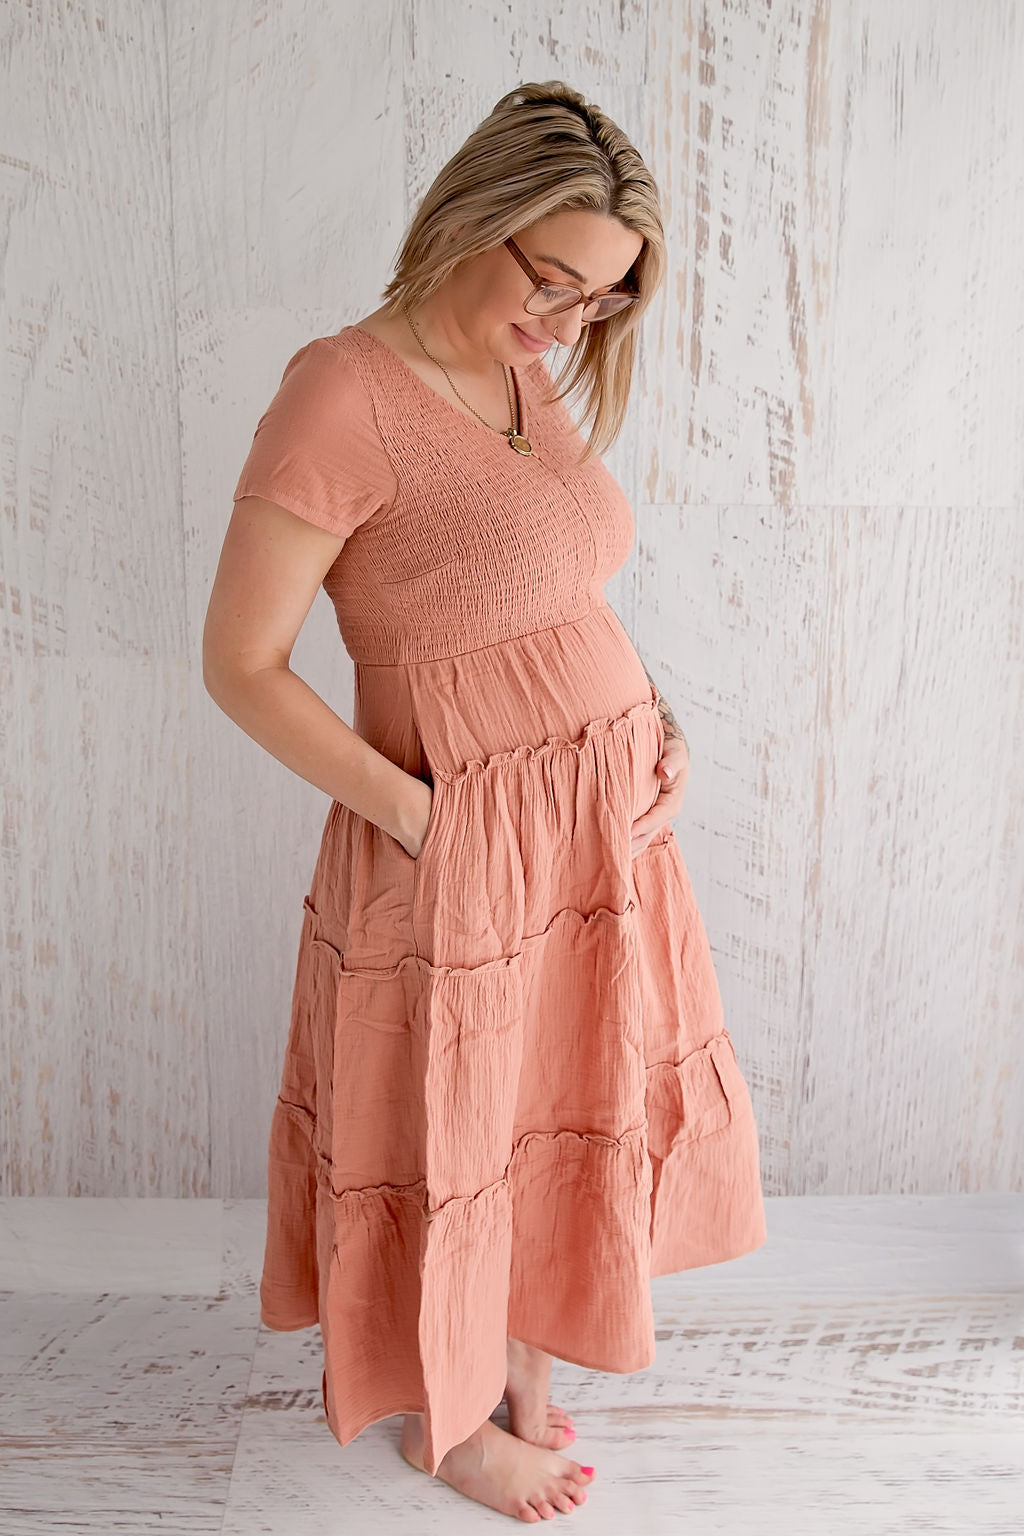 Flourish Maternity NZ - online mum and baby shop. Bella tiered dusty pink dress - pregnancy & breastfeeding flowing dress with pockets..